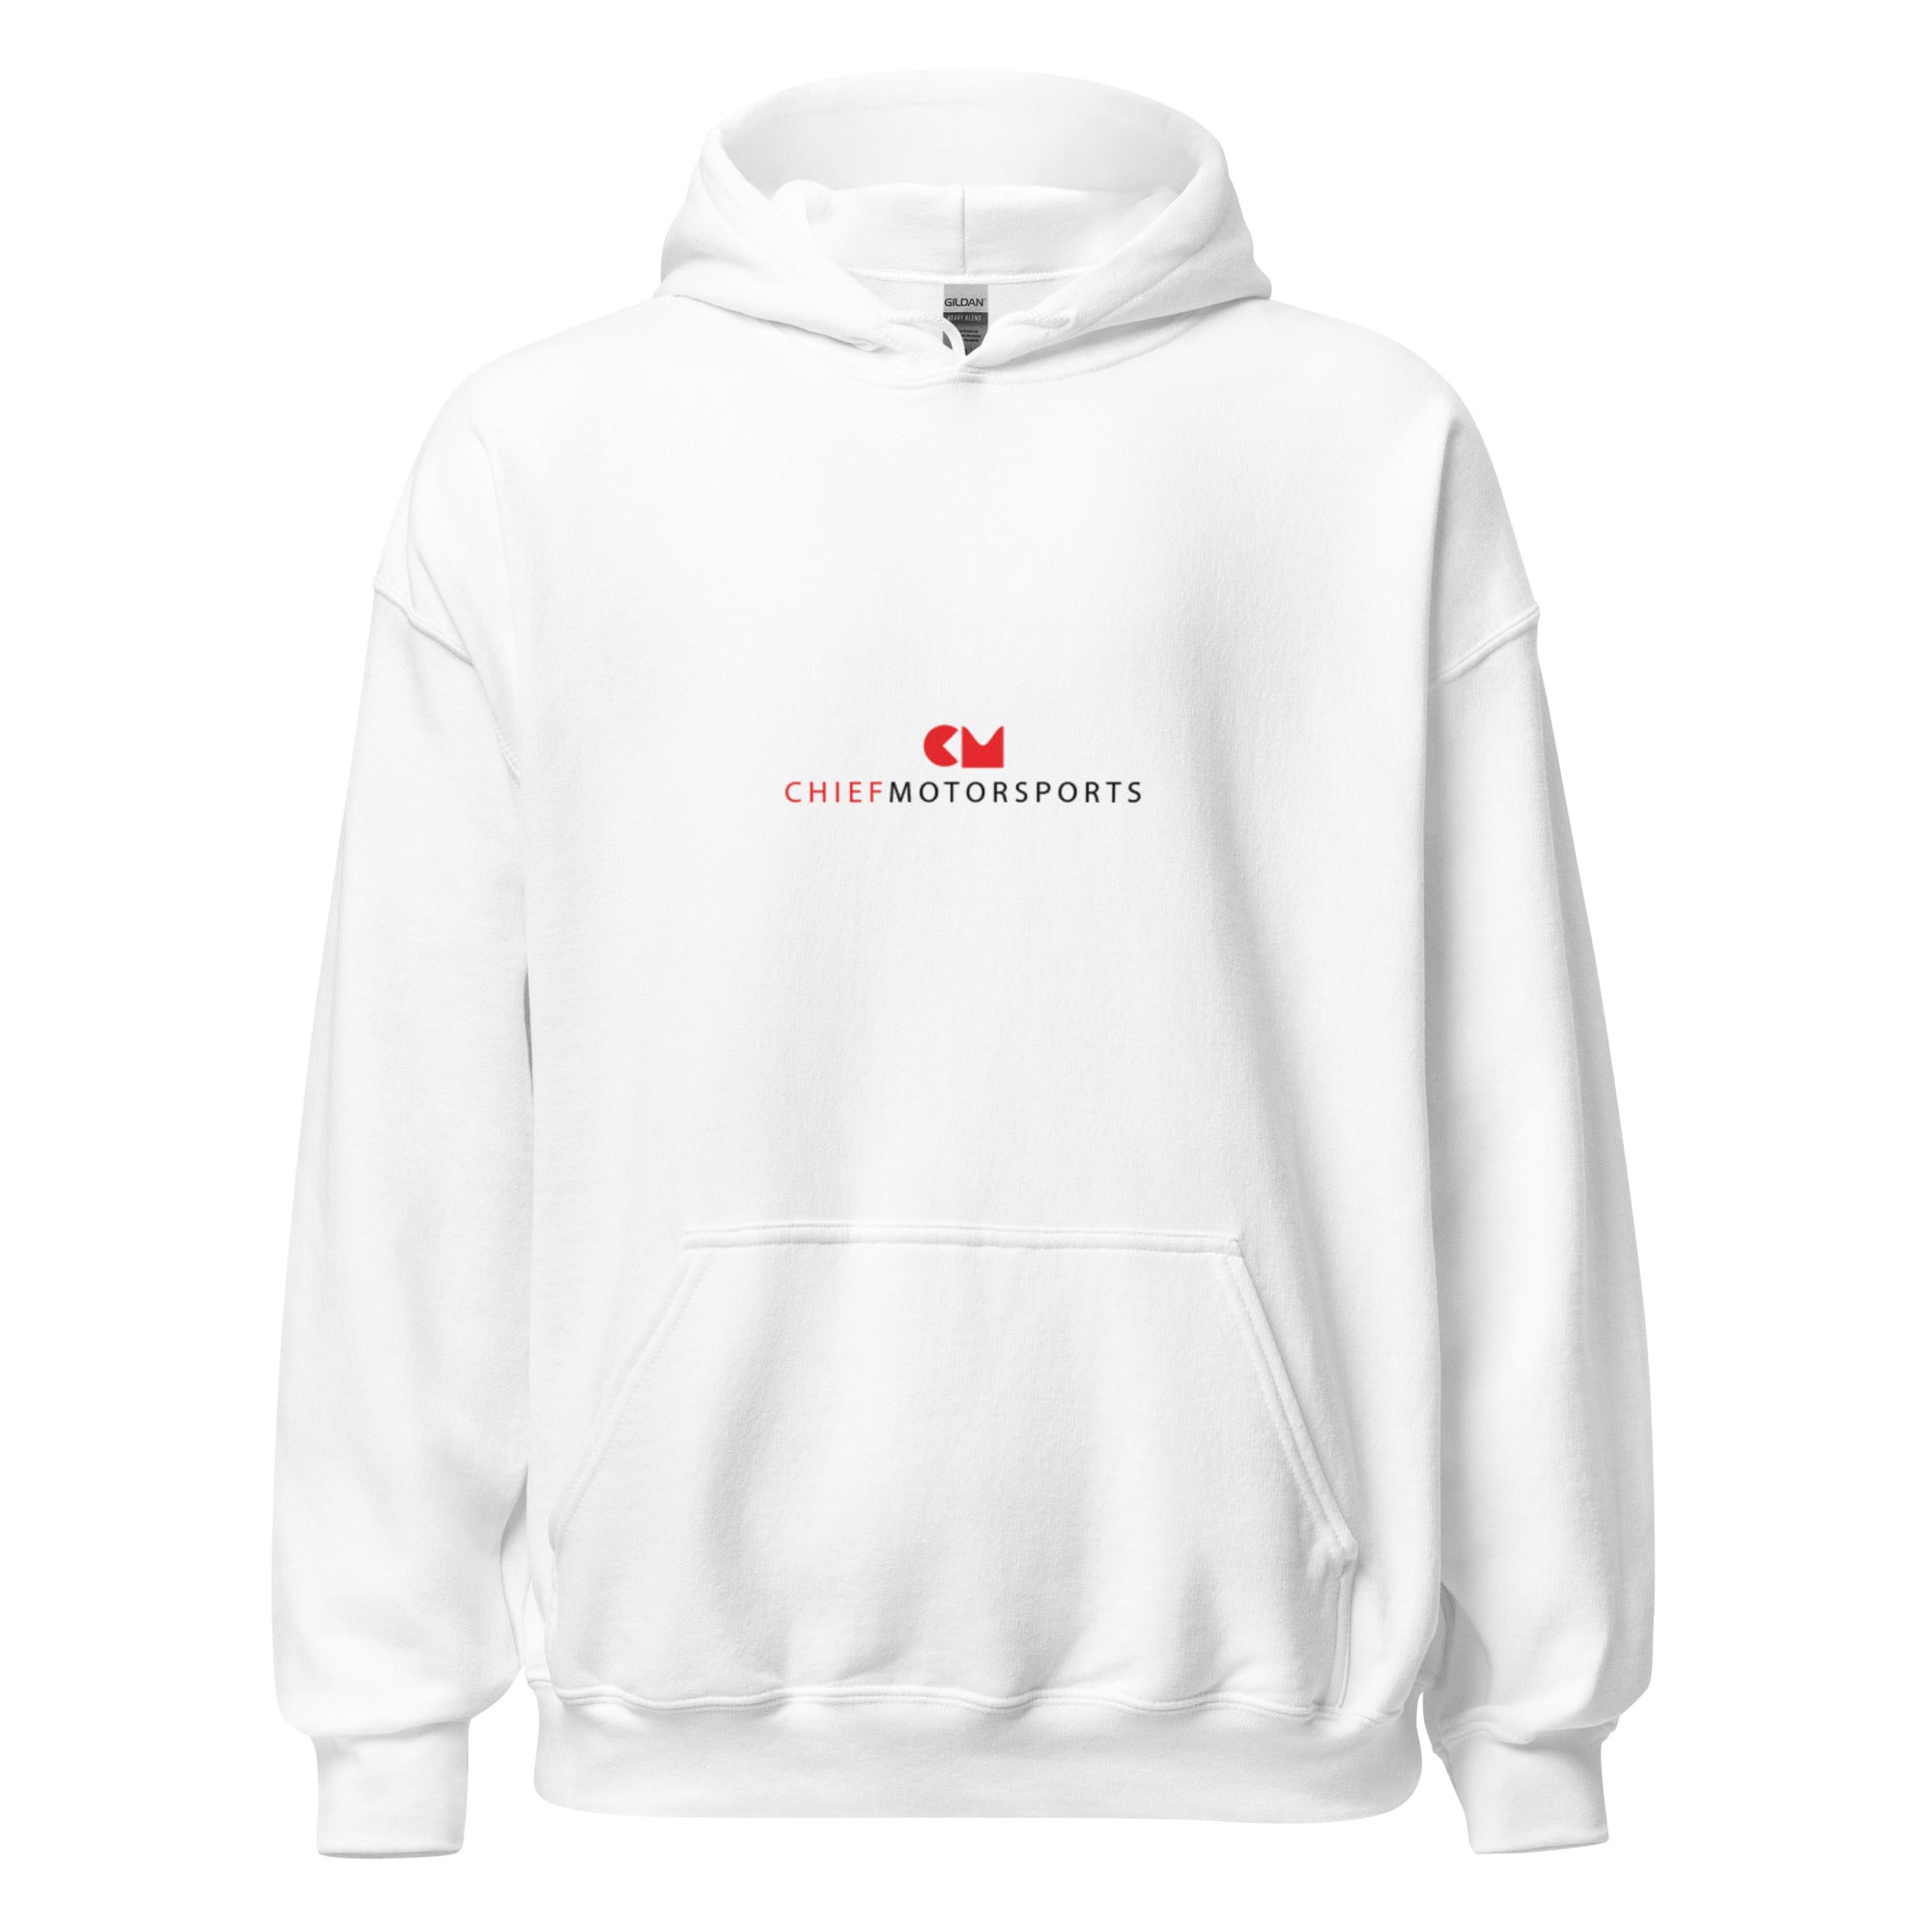 Chief Motorsports: Accelerate in Style with our Signature Unisex Hoodie!